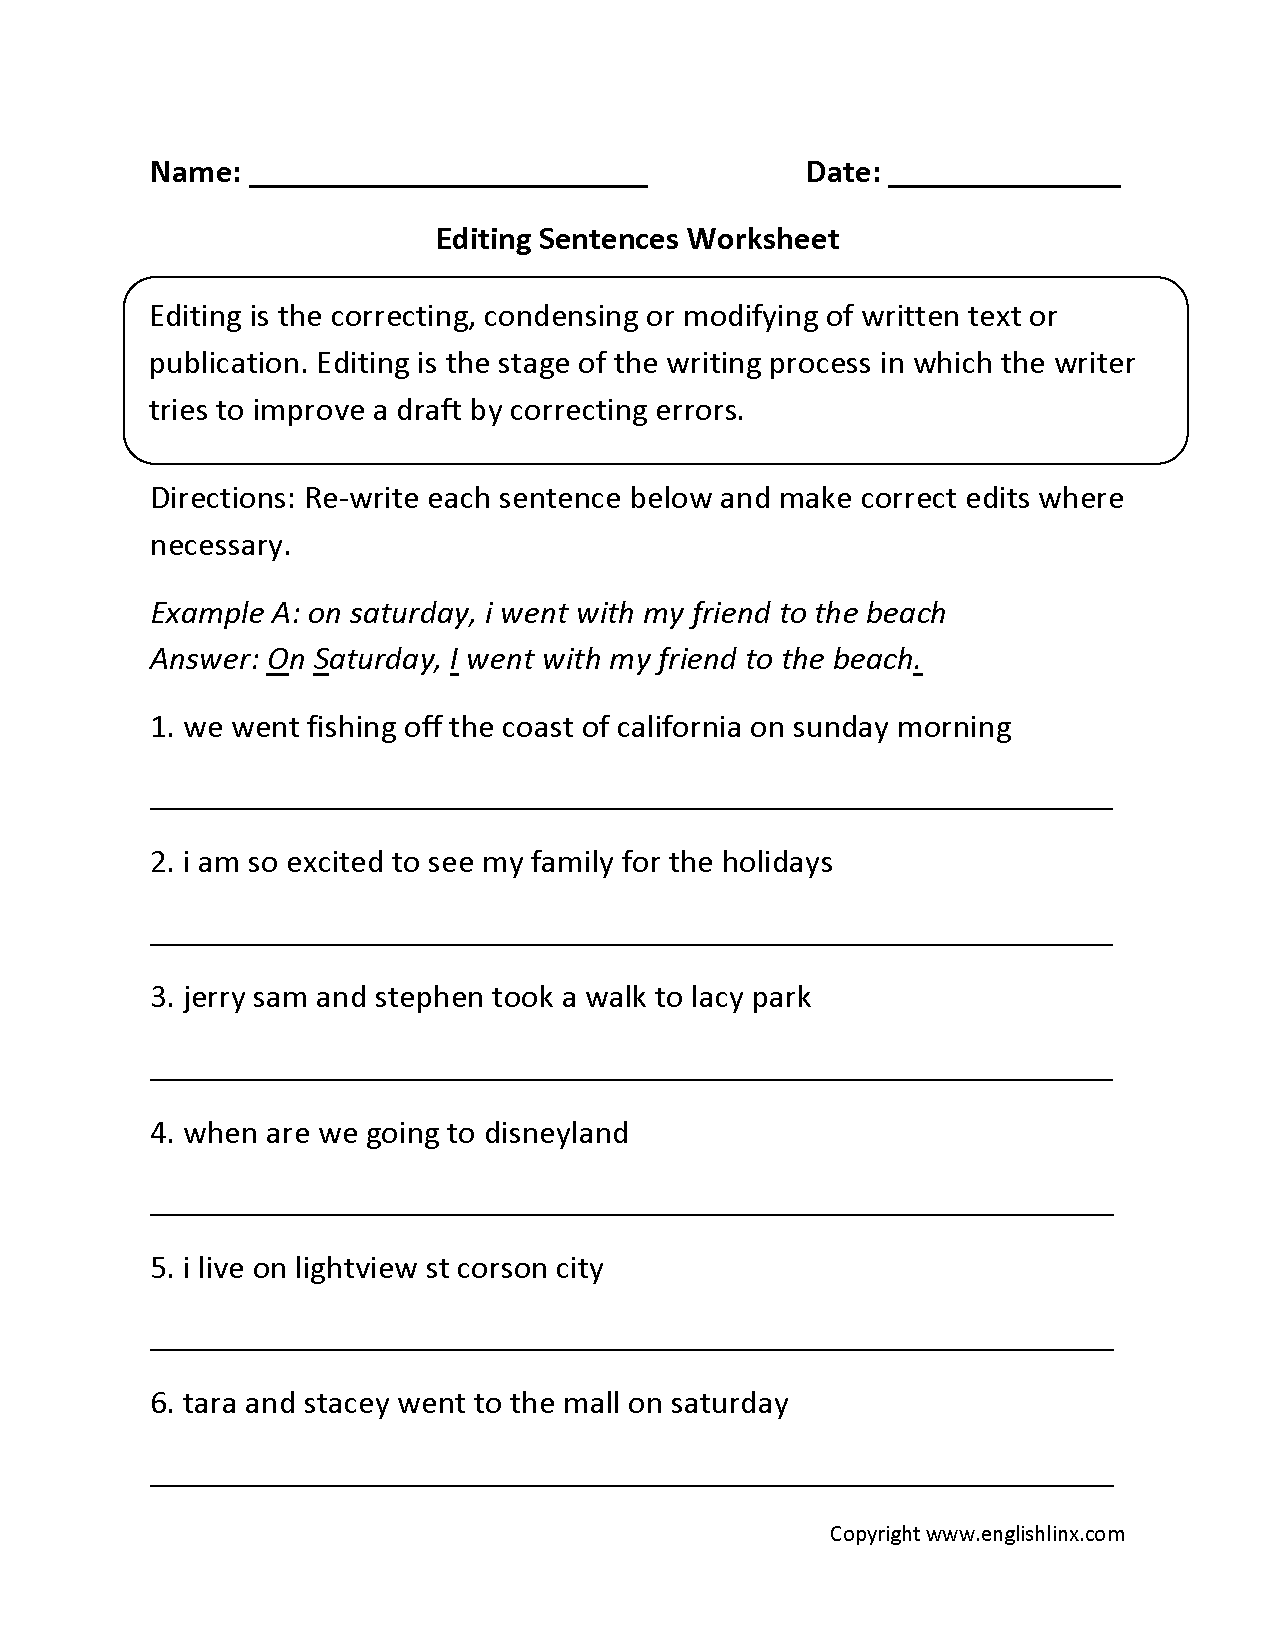 paragraph-editing-worksheets-for-4th-grade-writing-worksheets-editing-worksheets81-free